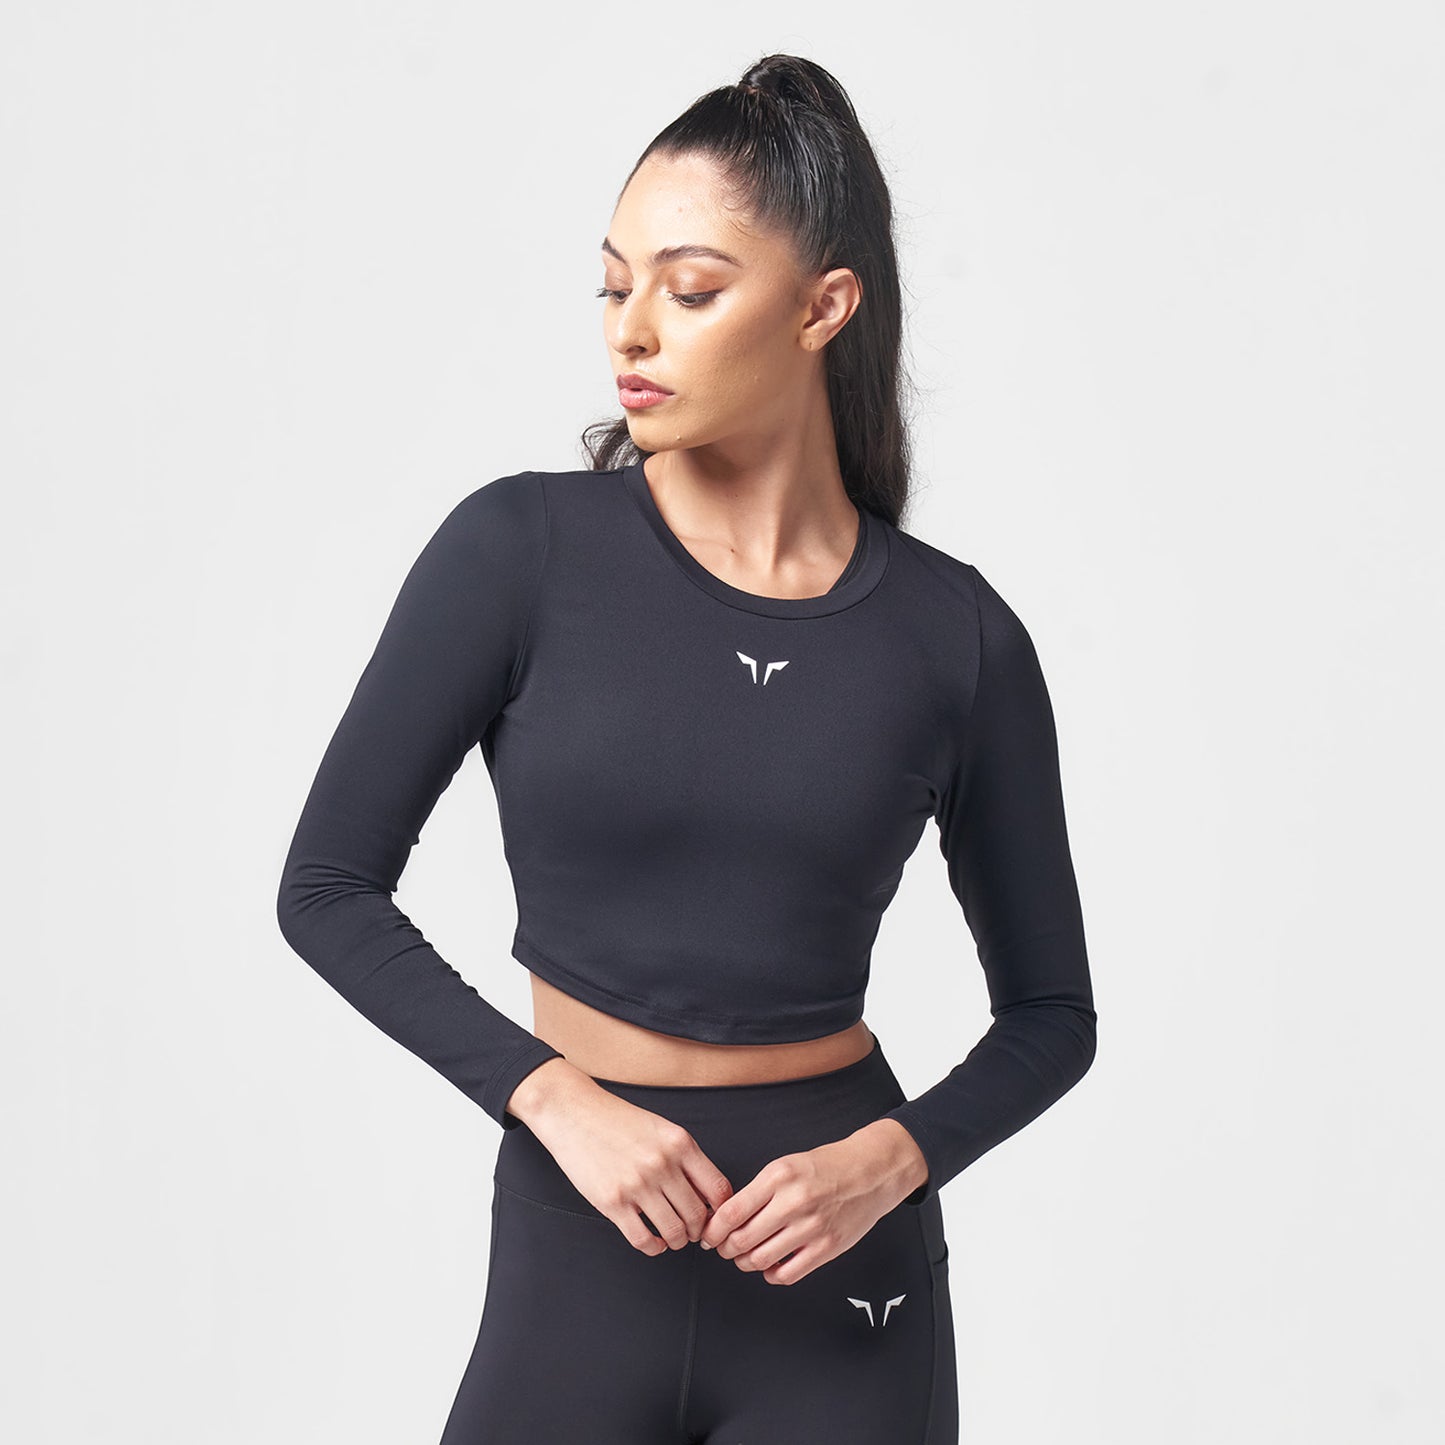 squatwolf-gym-wear-essential-full-sleeves-crop-top-black-workout-top-for-women